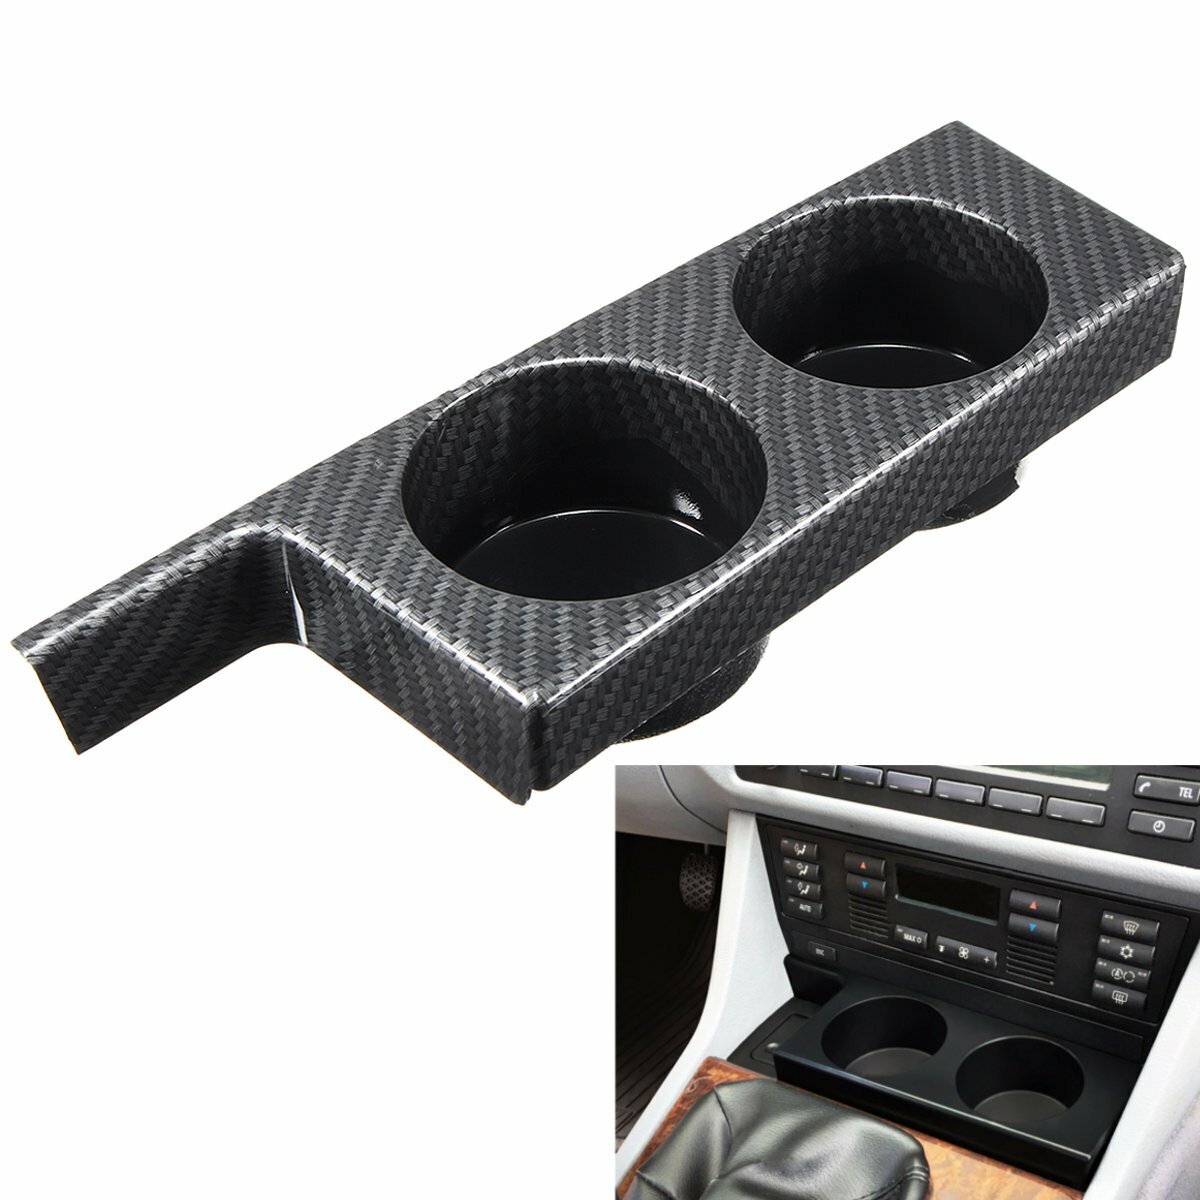 

Front Center Drink Can Cup Holder For BMW E39 M5 528i 530i 540i 5 Series 1997-2003